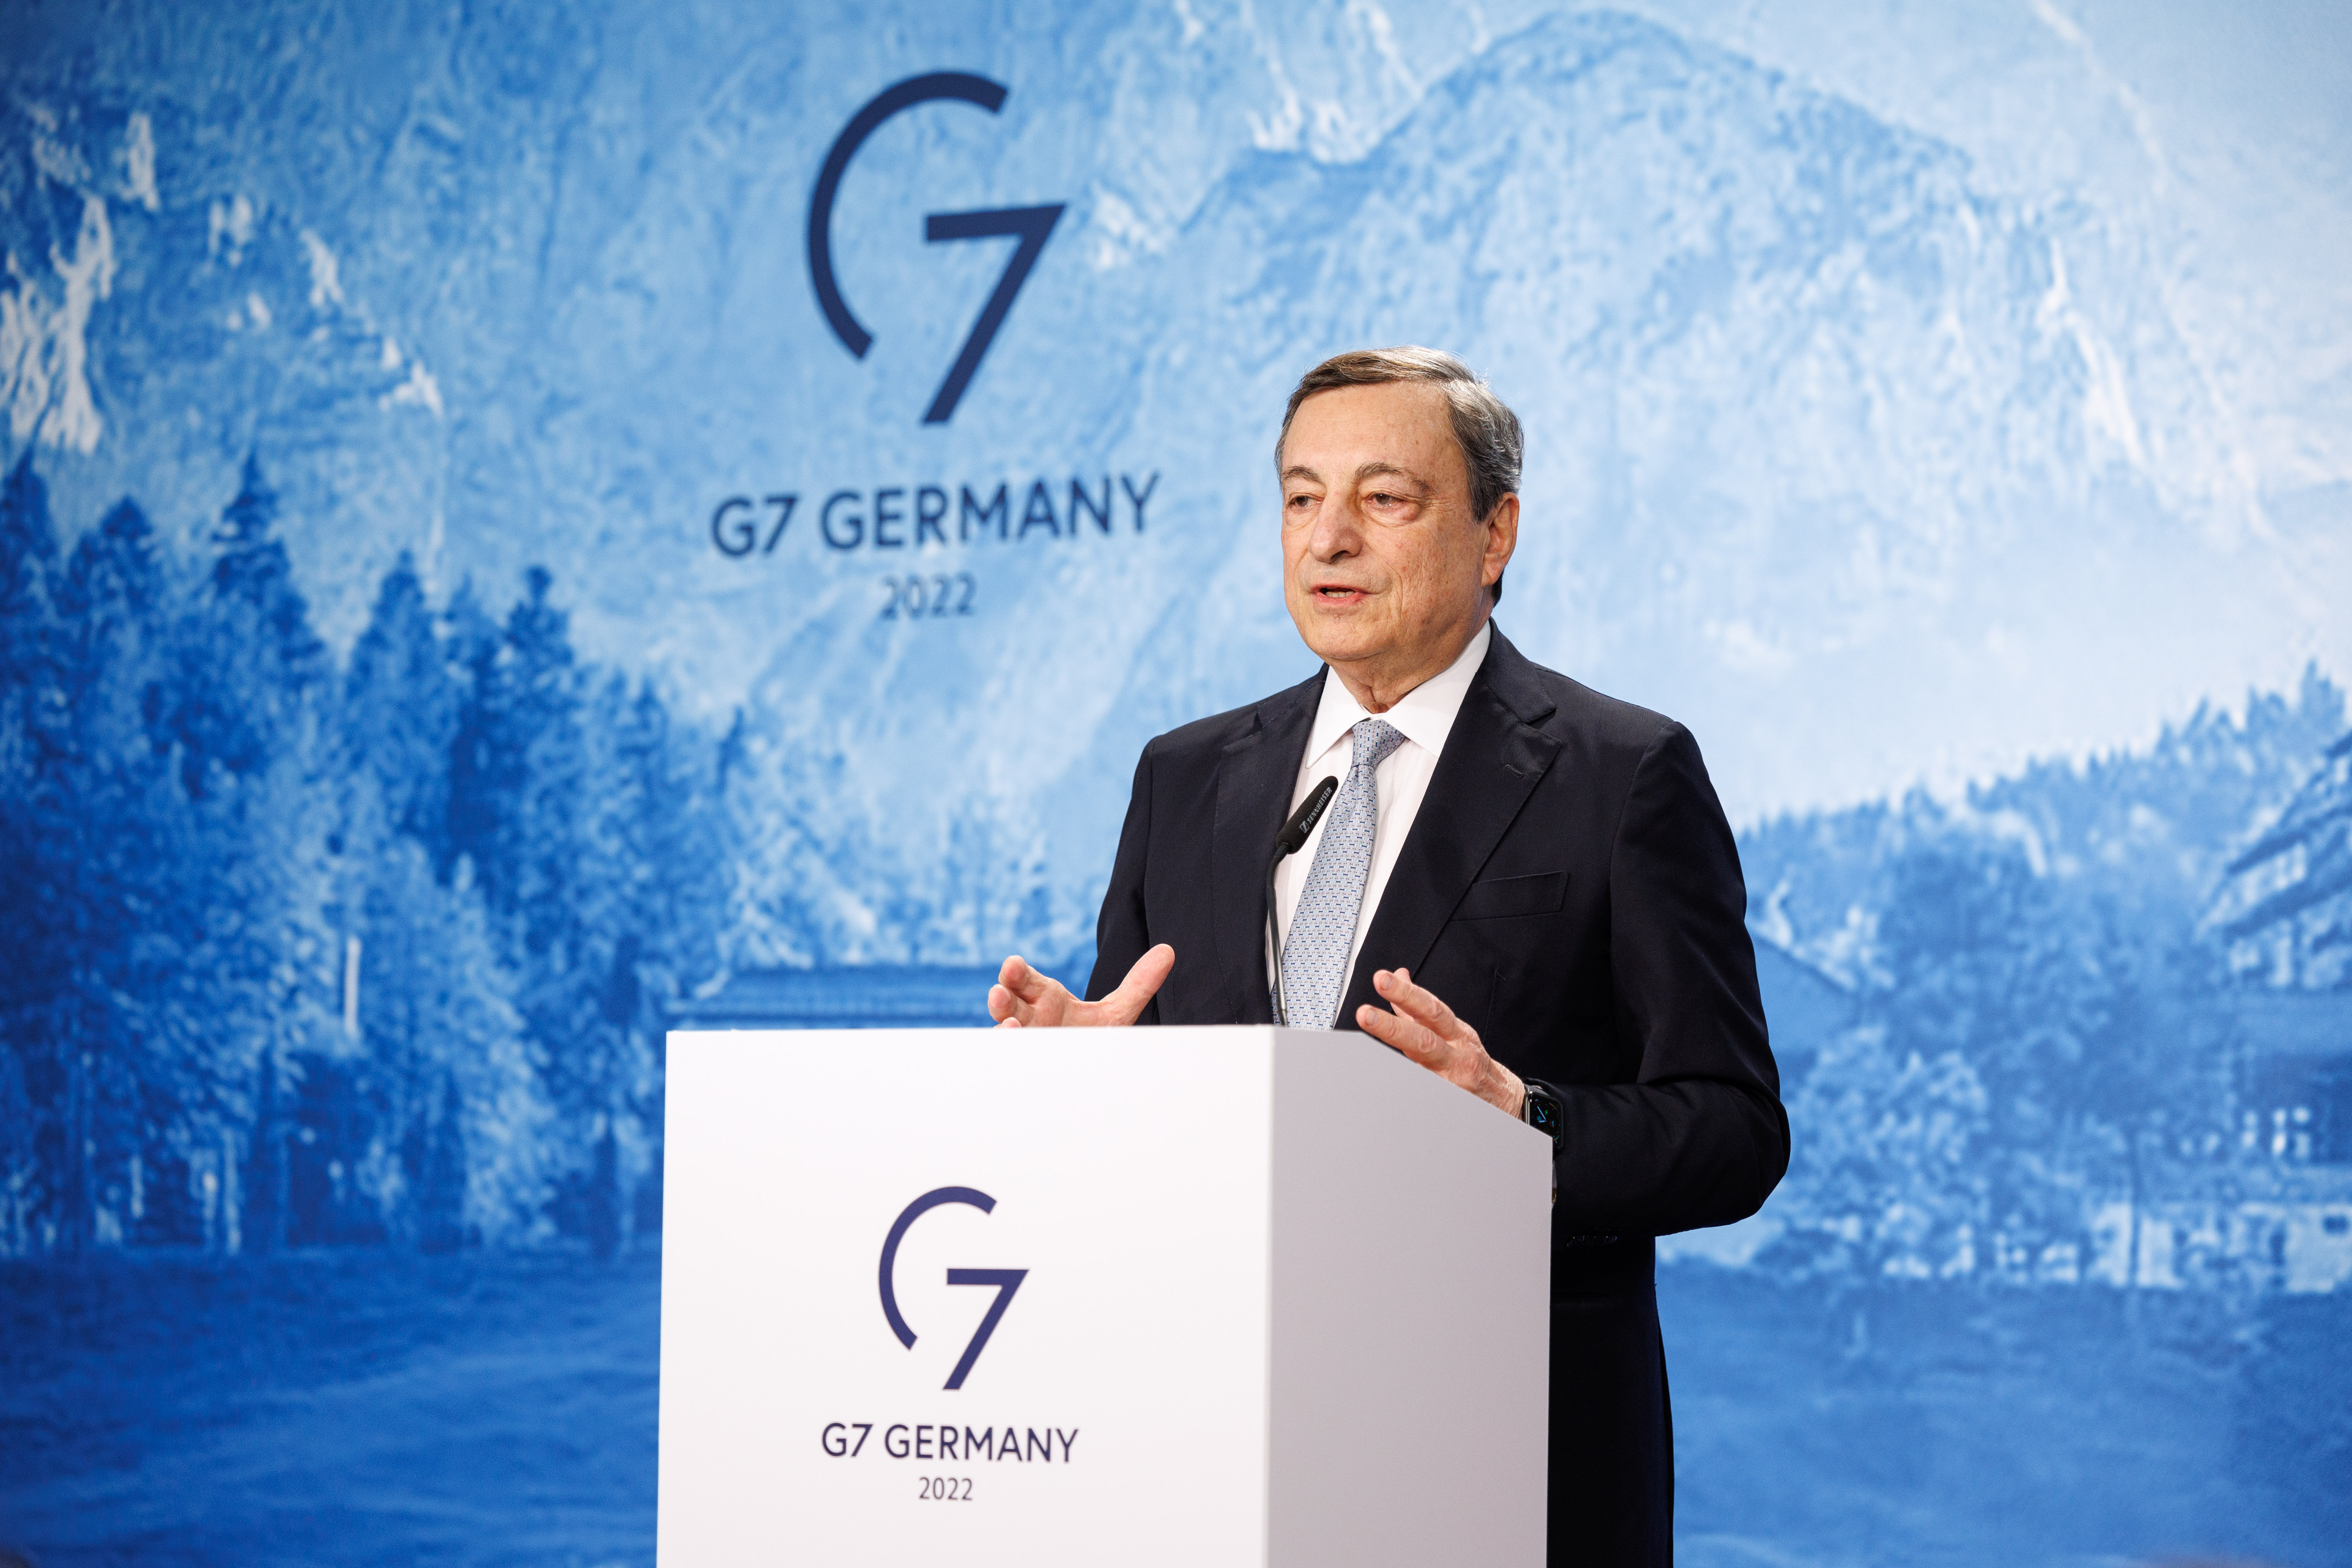 Italian Prime Minister Mario Draghi gives a press conference at the end of the G7 summit.